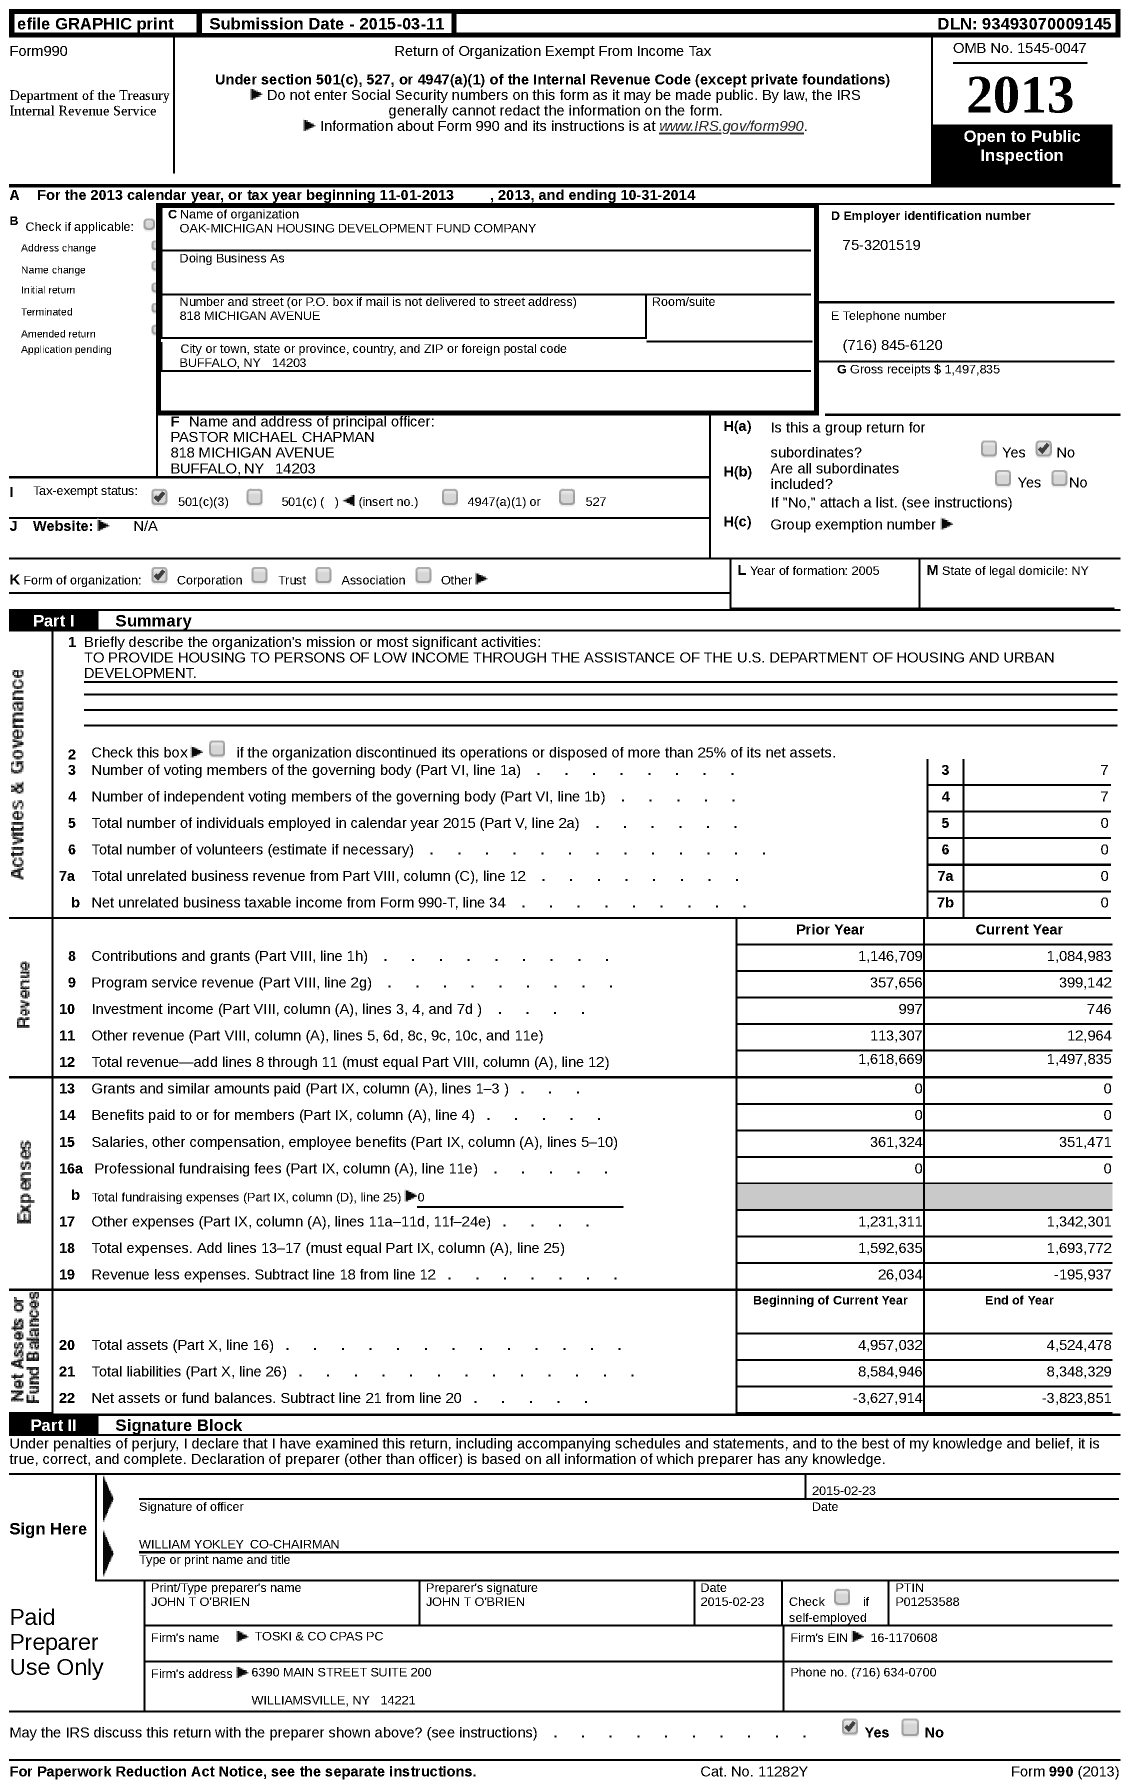 Image of first page of 2013 Form 990 for Oak-Michigan Housing Development Fund Company